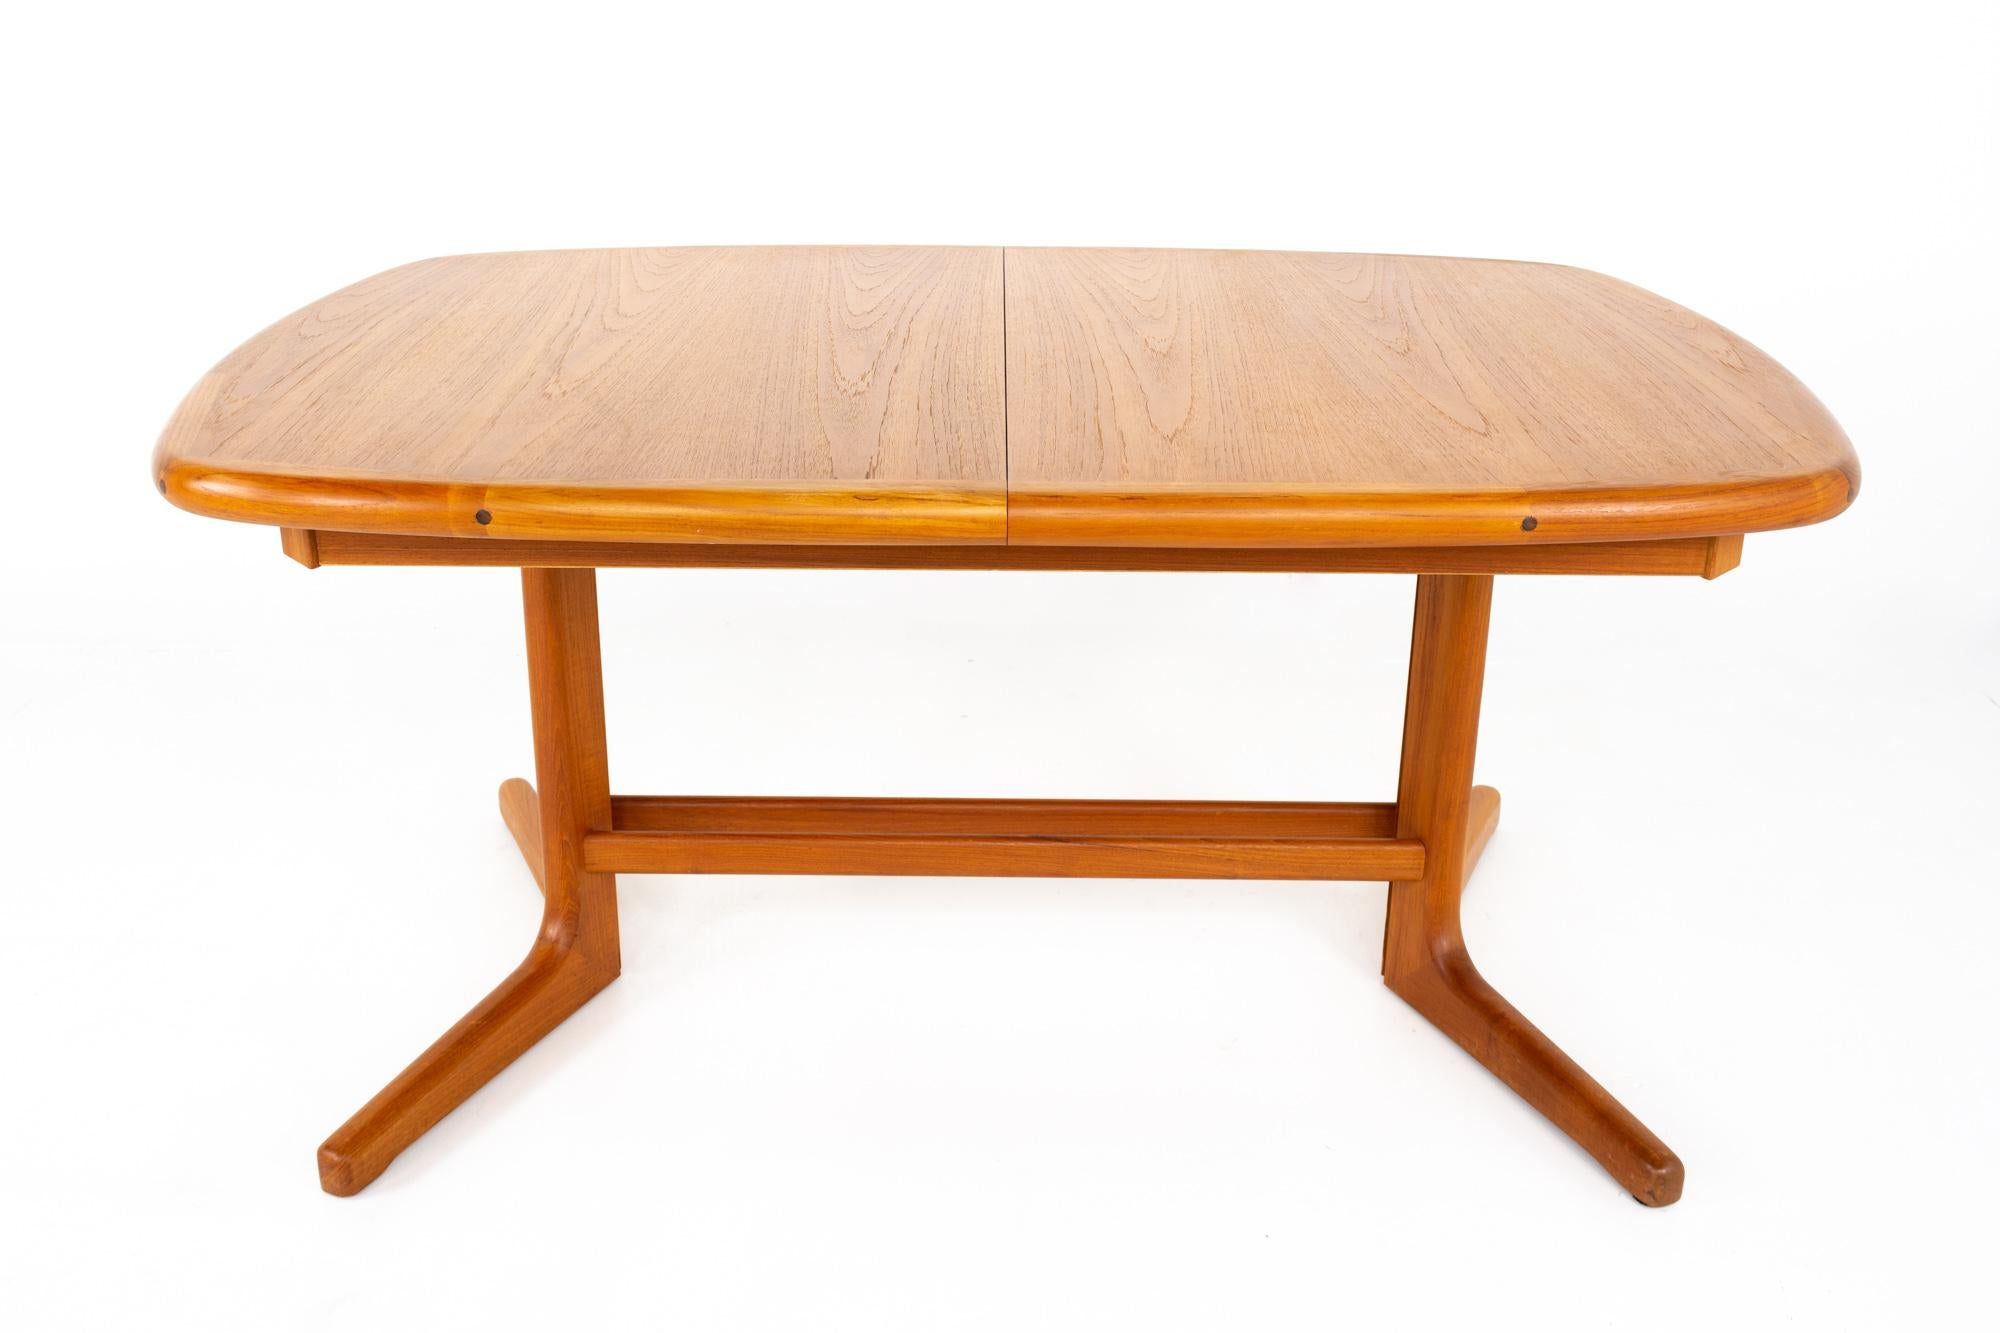 D-Scan Mid Century teak hidden leaf dining table
Table measures: 58.75 wide x 38.25 deep x 28 high
Table with leaf measures: 97 inches wide and leaf alone measures 38.25 inches wide 

This piece is available in what we call restored vintage